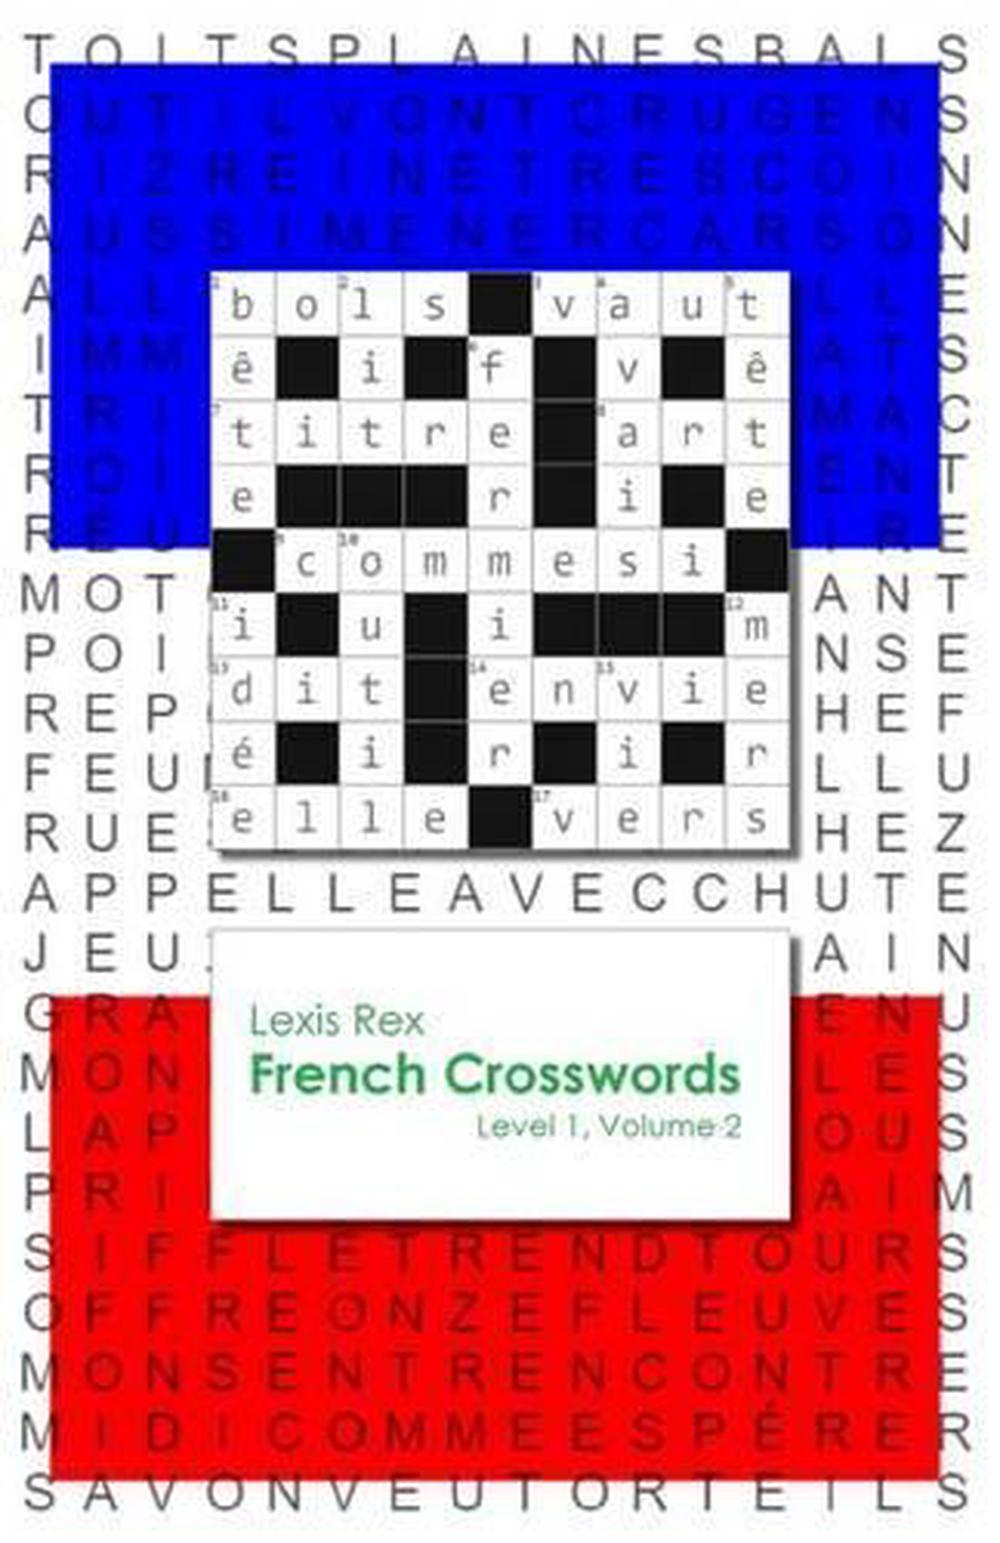 French Crosswords: Level 1, Volume 2 by Lexis Rex (English) Paperback ...